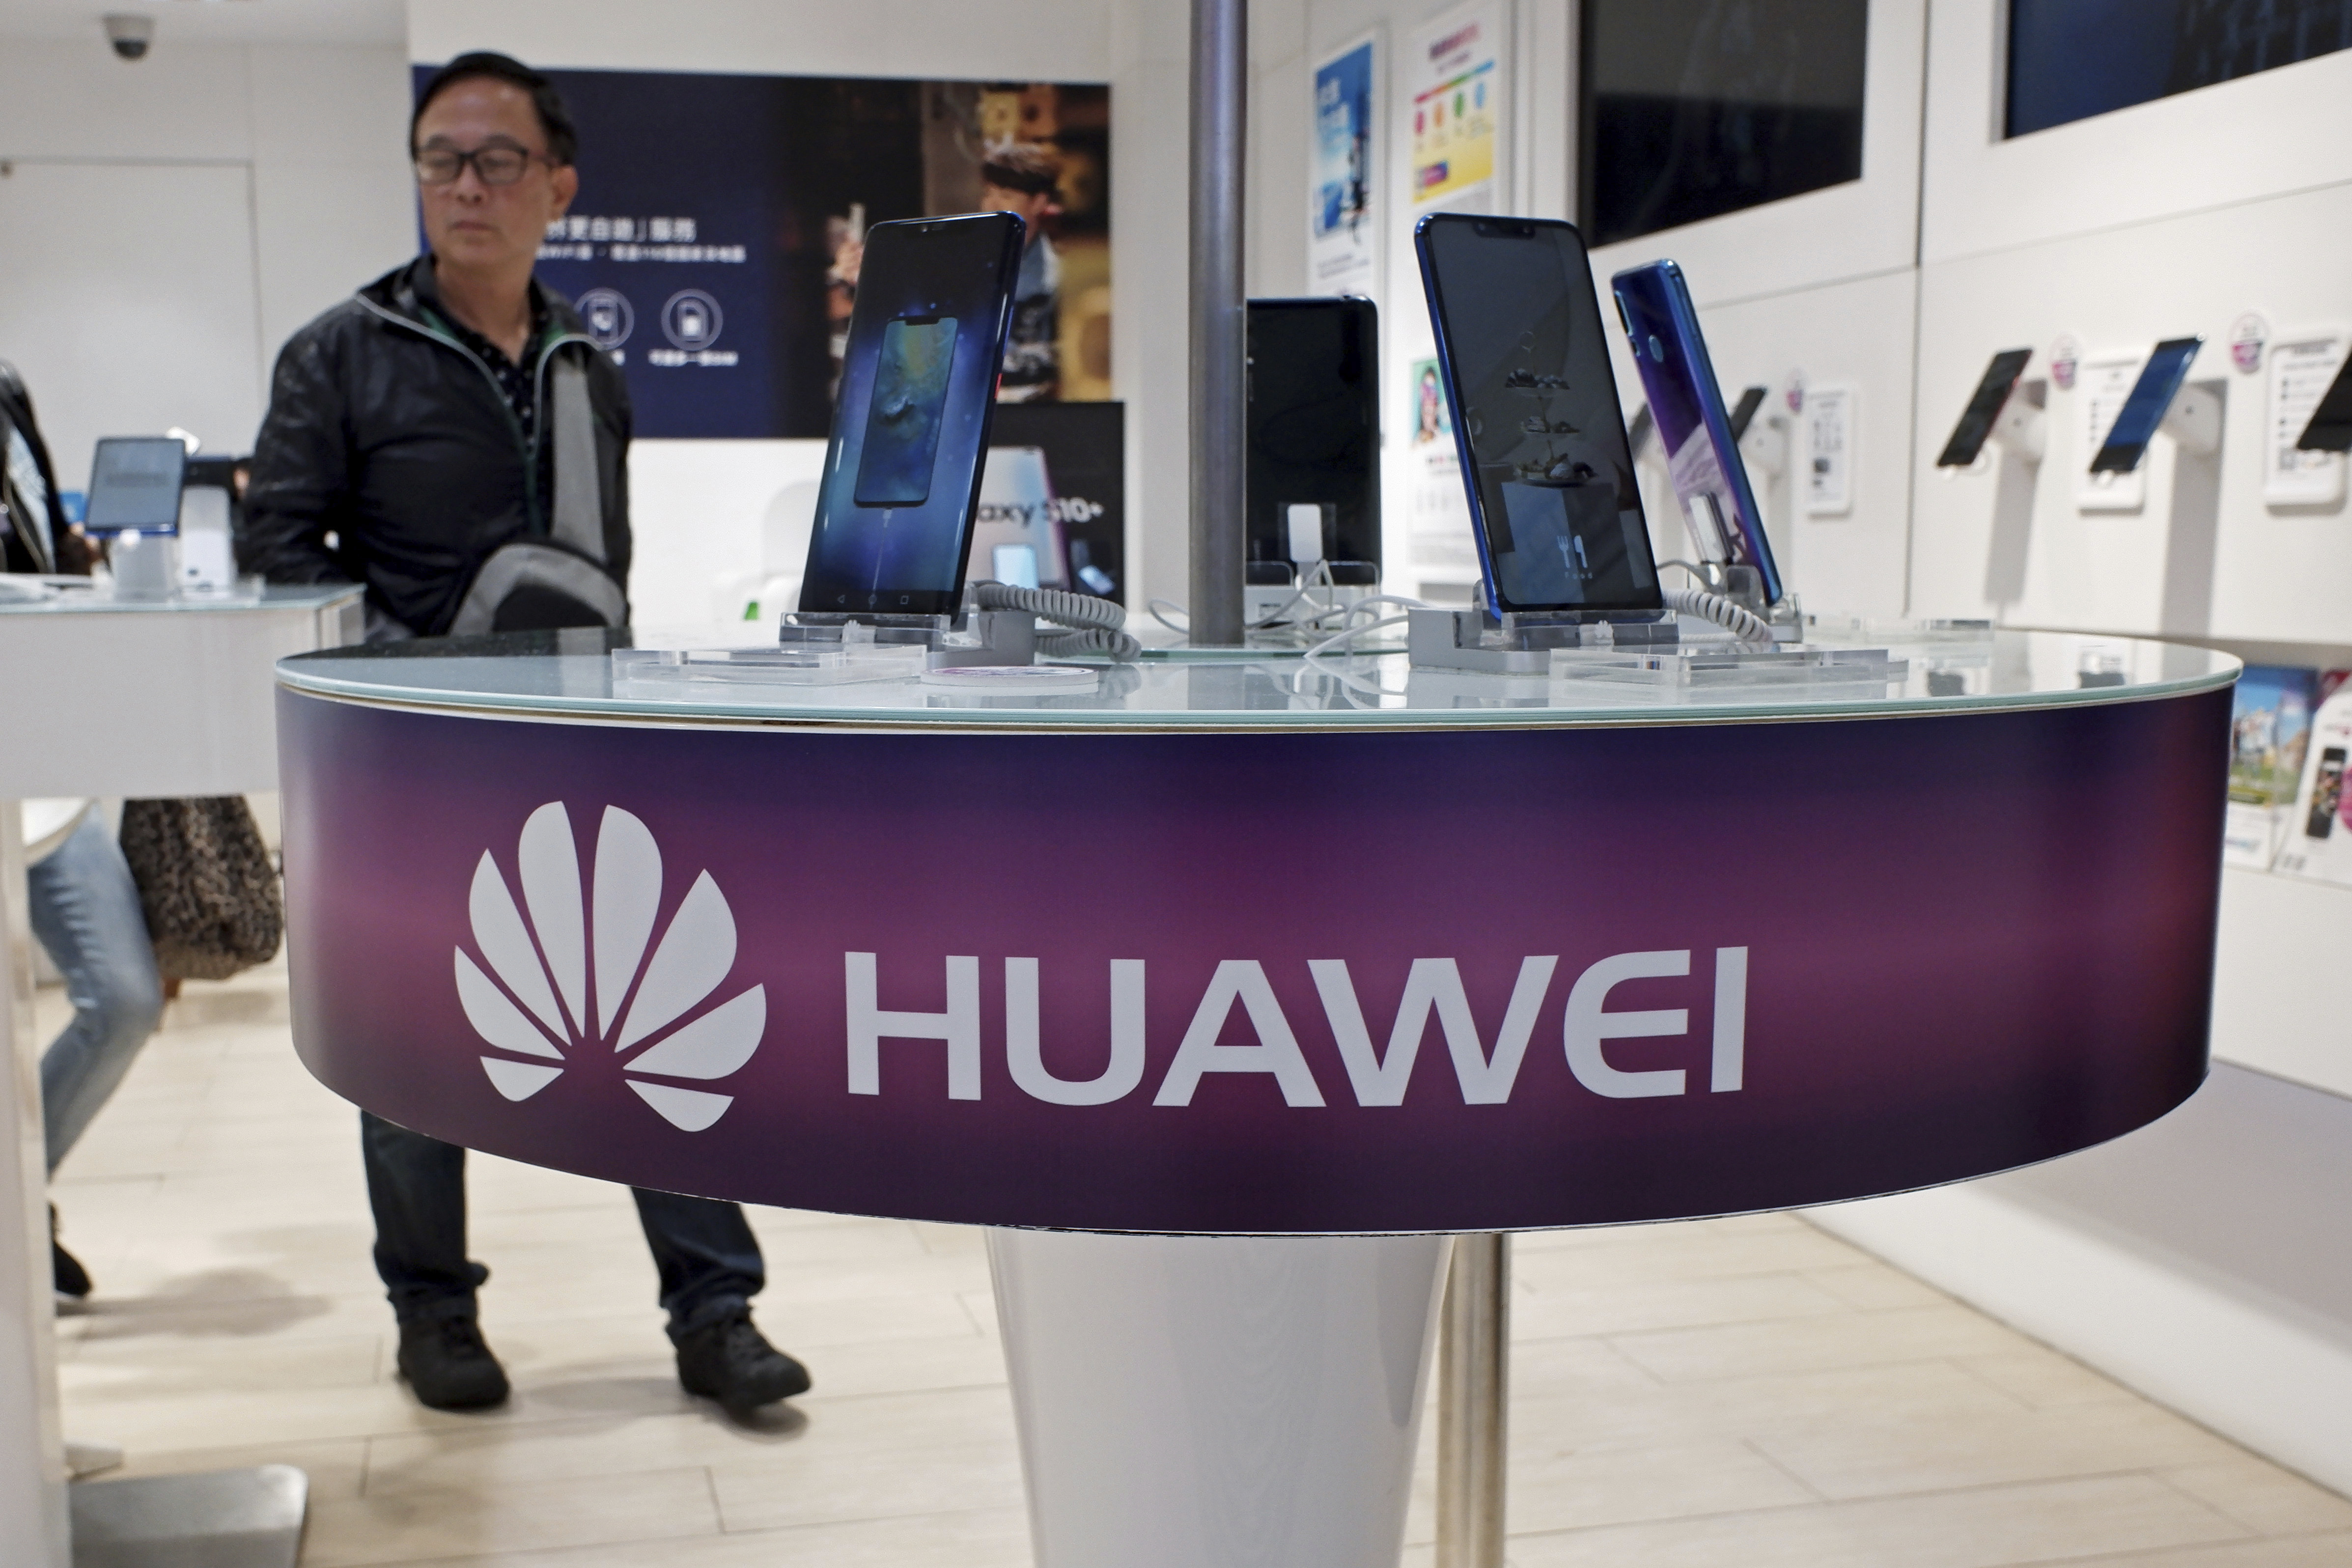 jammeraportable | China’s Huawei Says 1Q Sales Up 39%